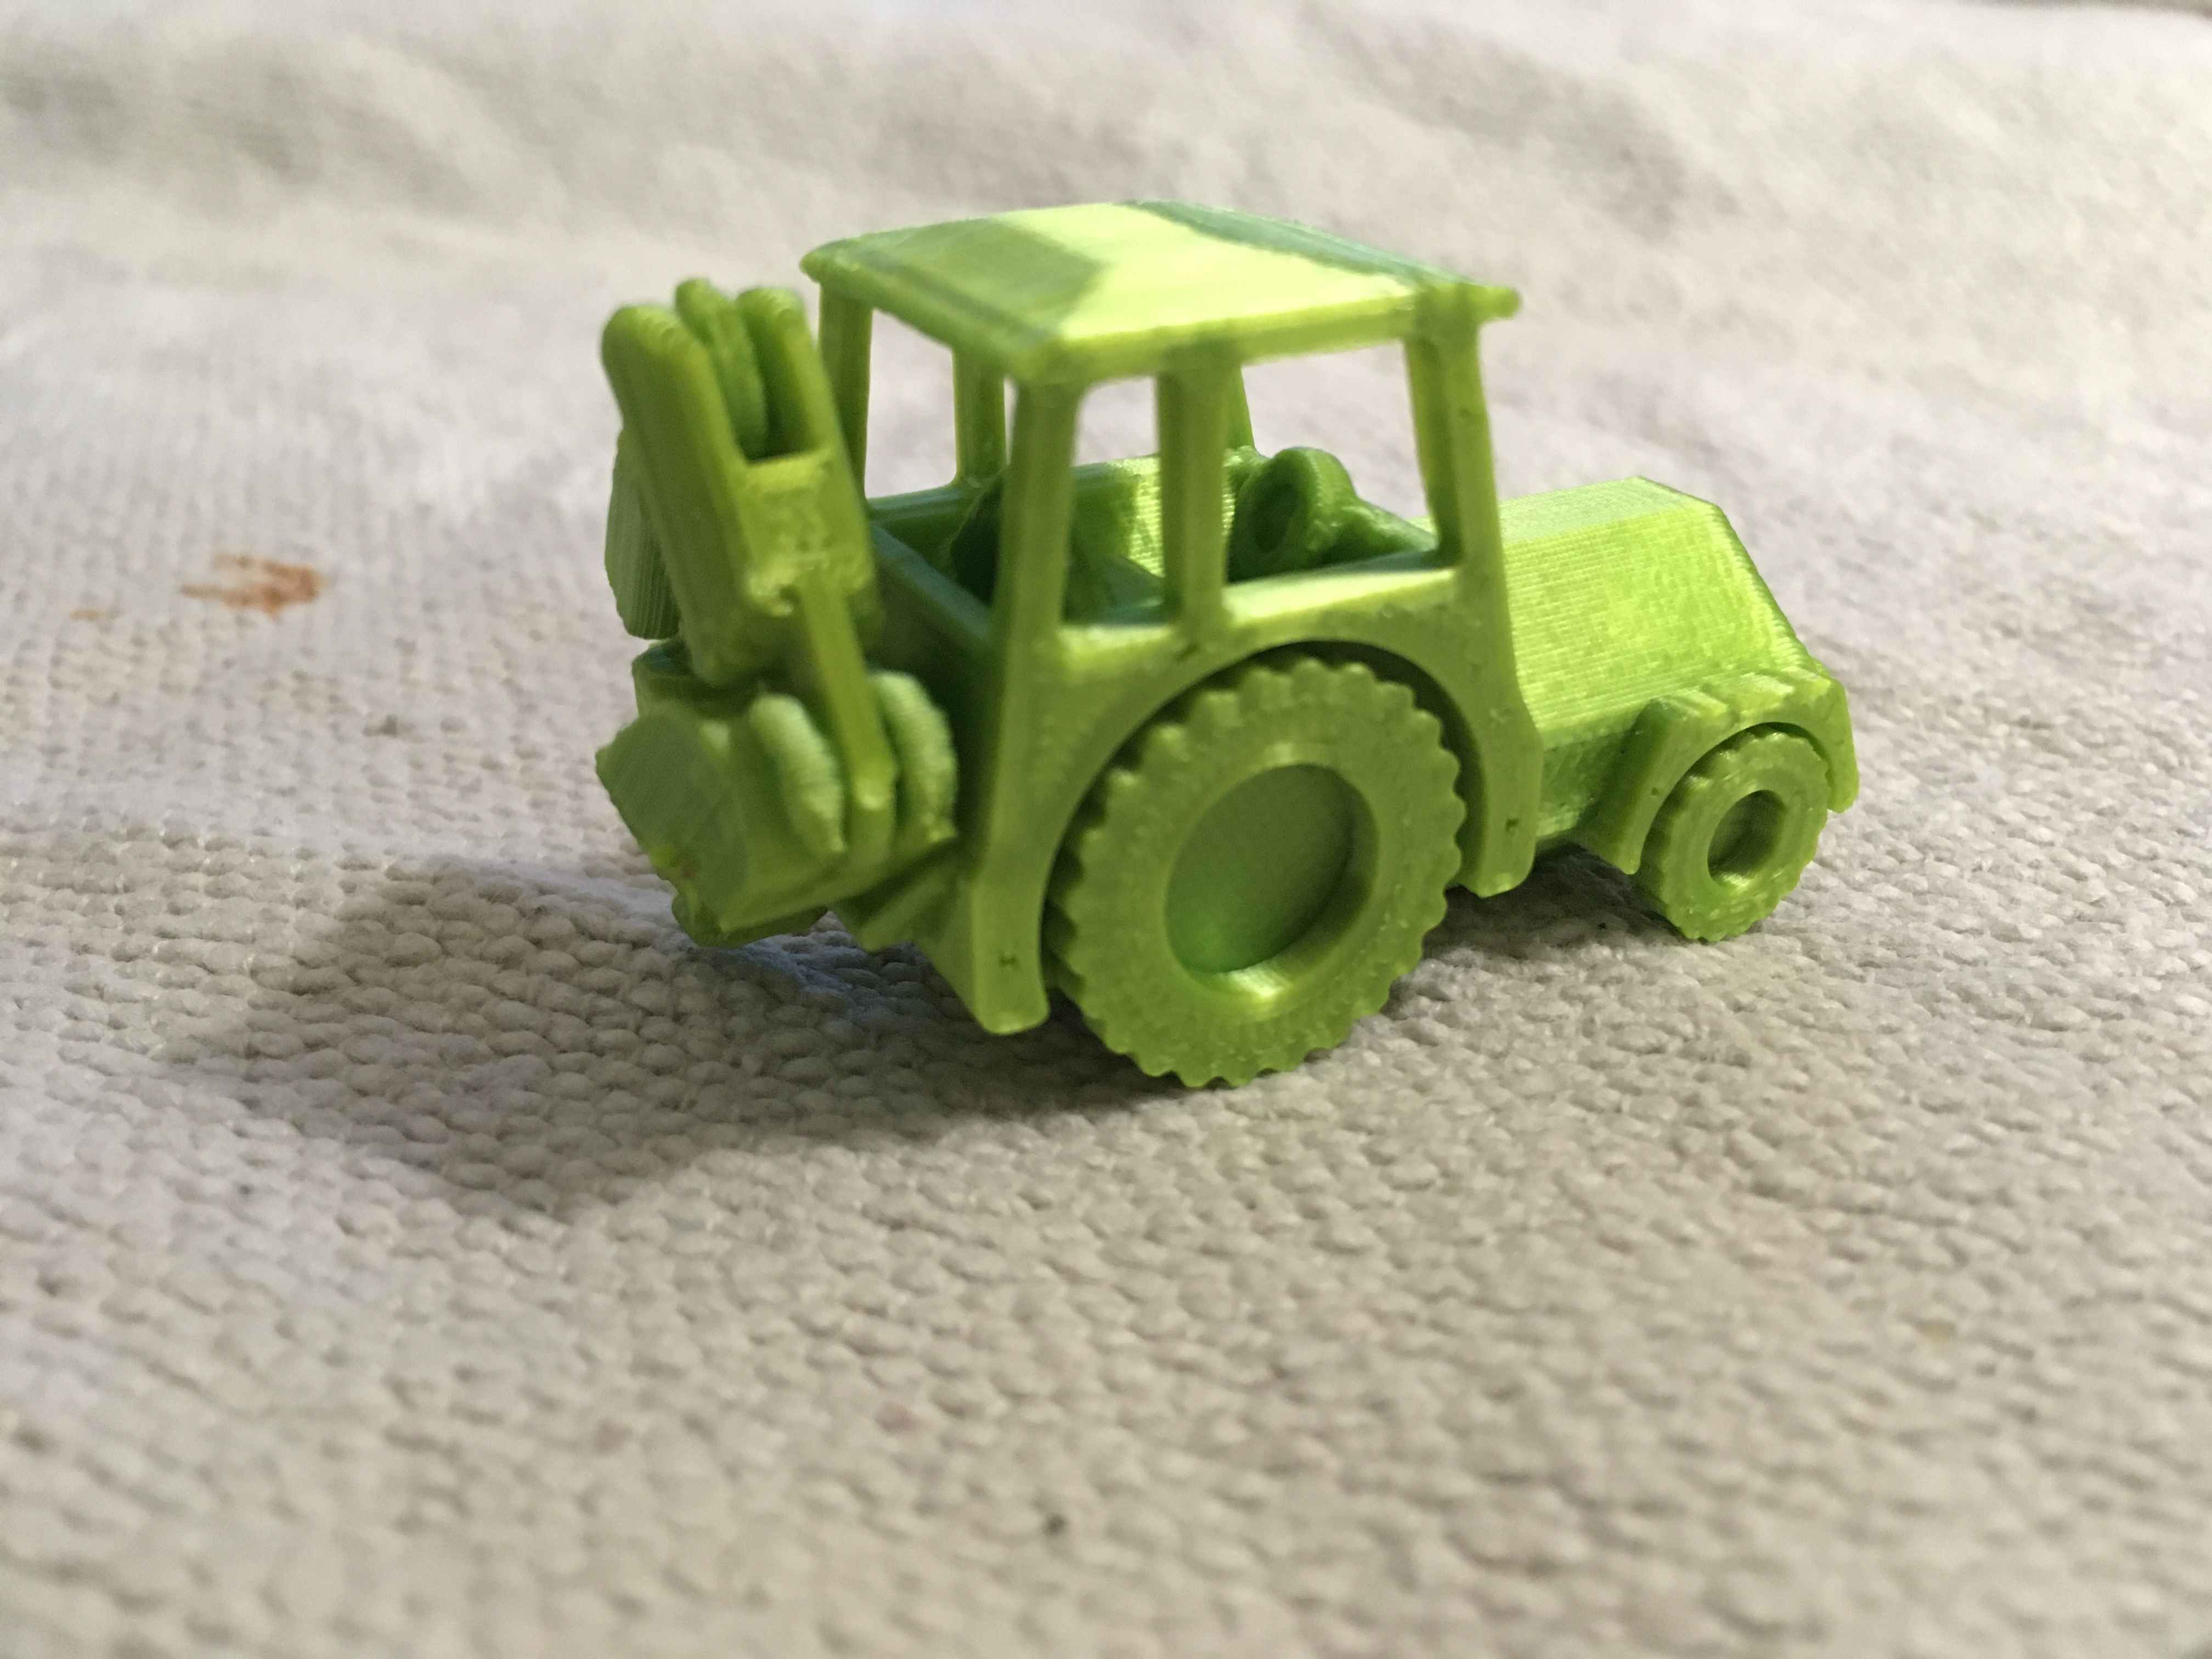 Small tractor - flexi excavator (printed in one piece without supports)